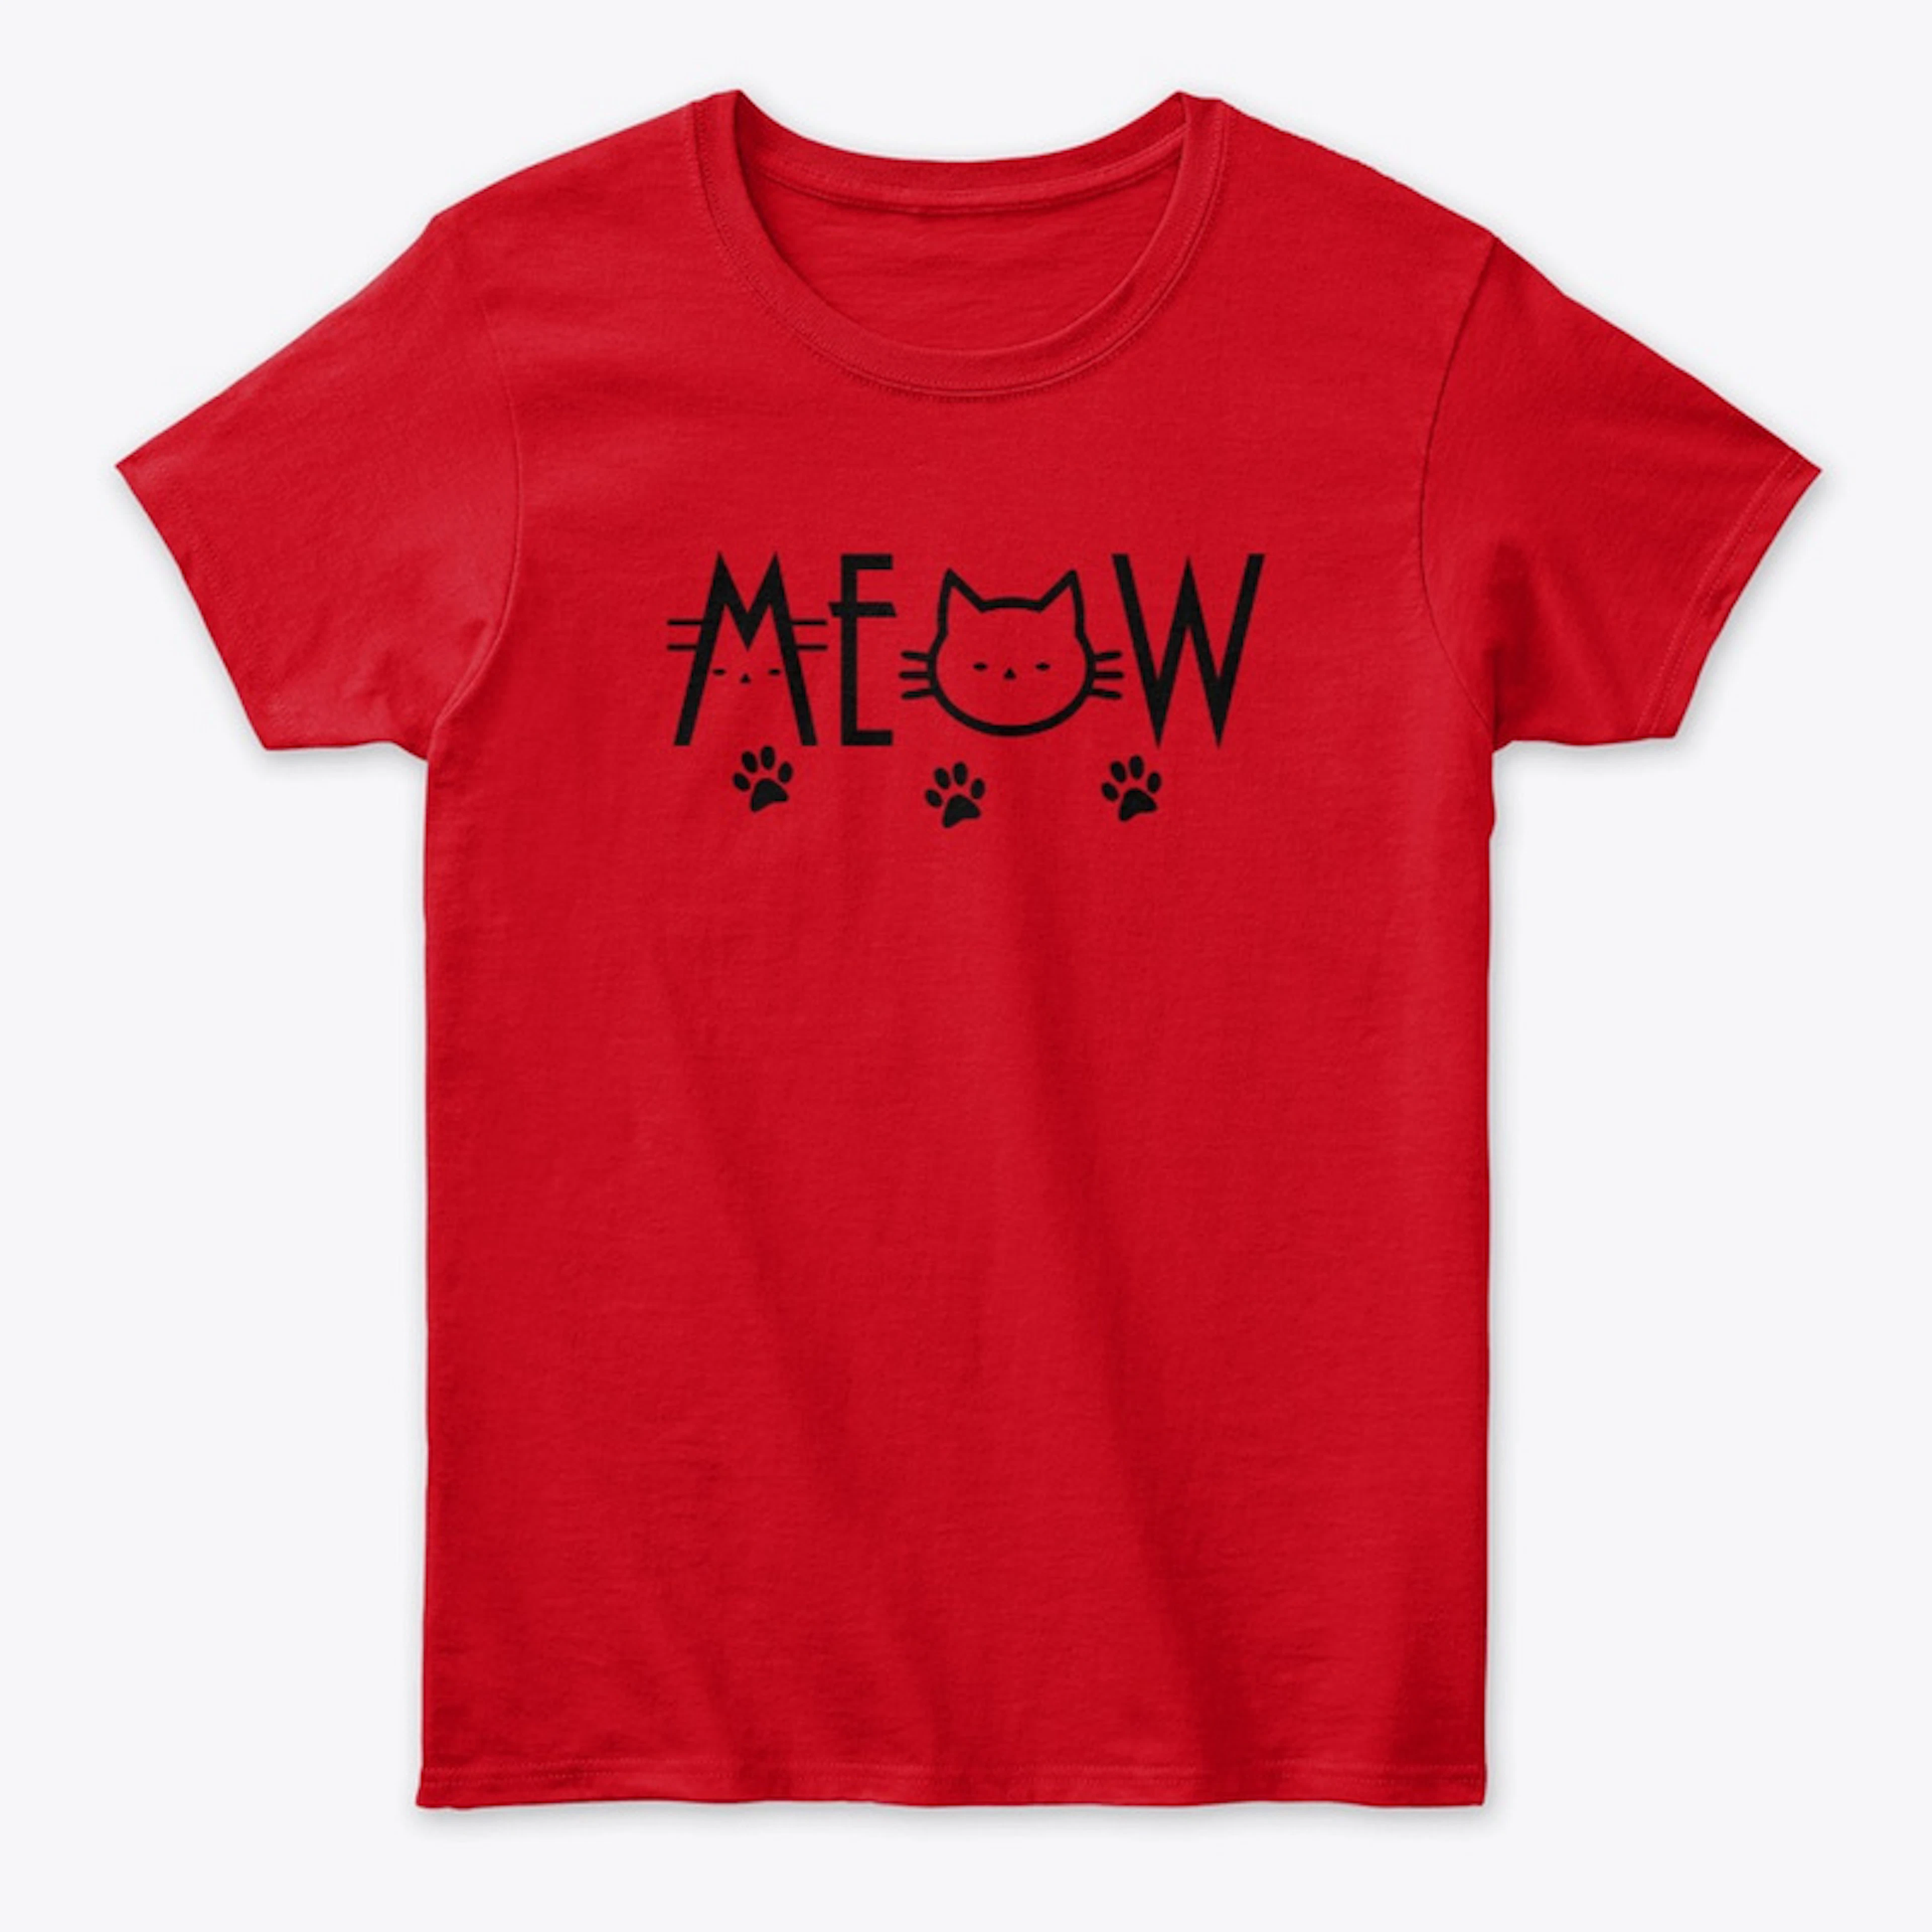 LIMITED EDTIONS|MEOW|CATS